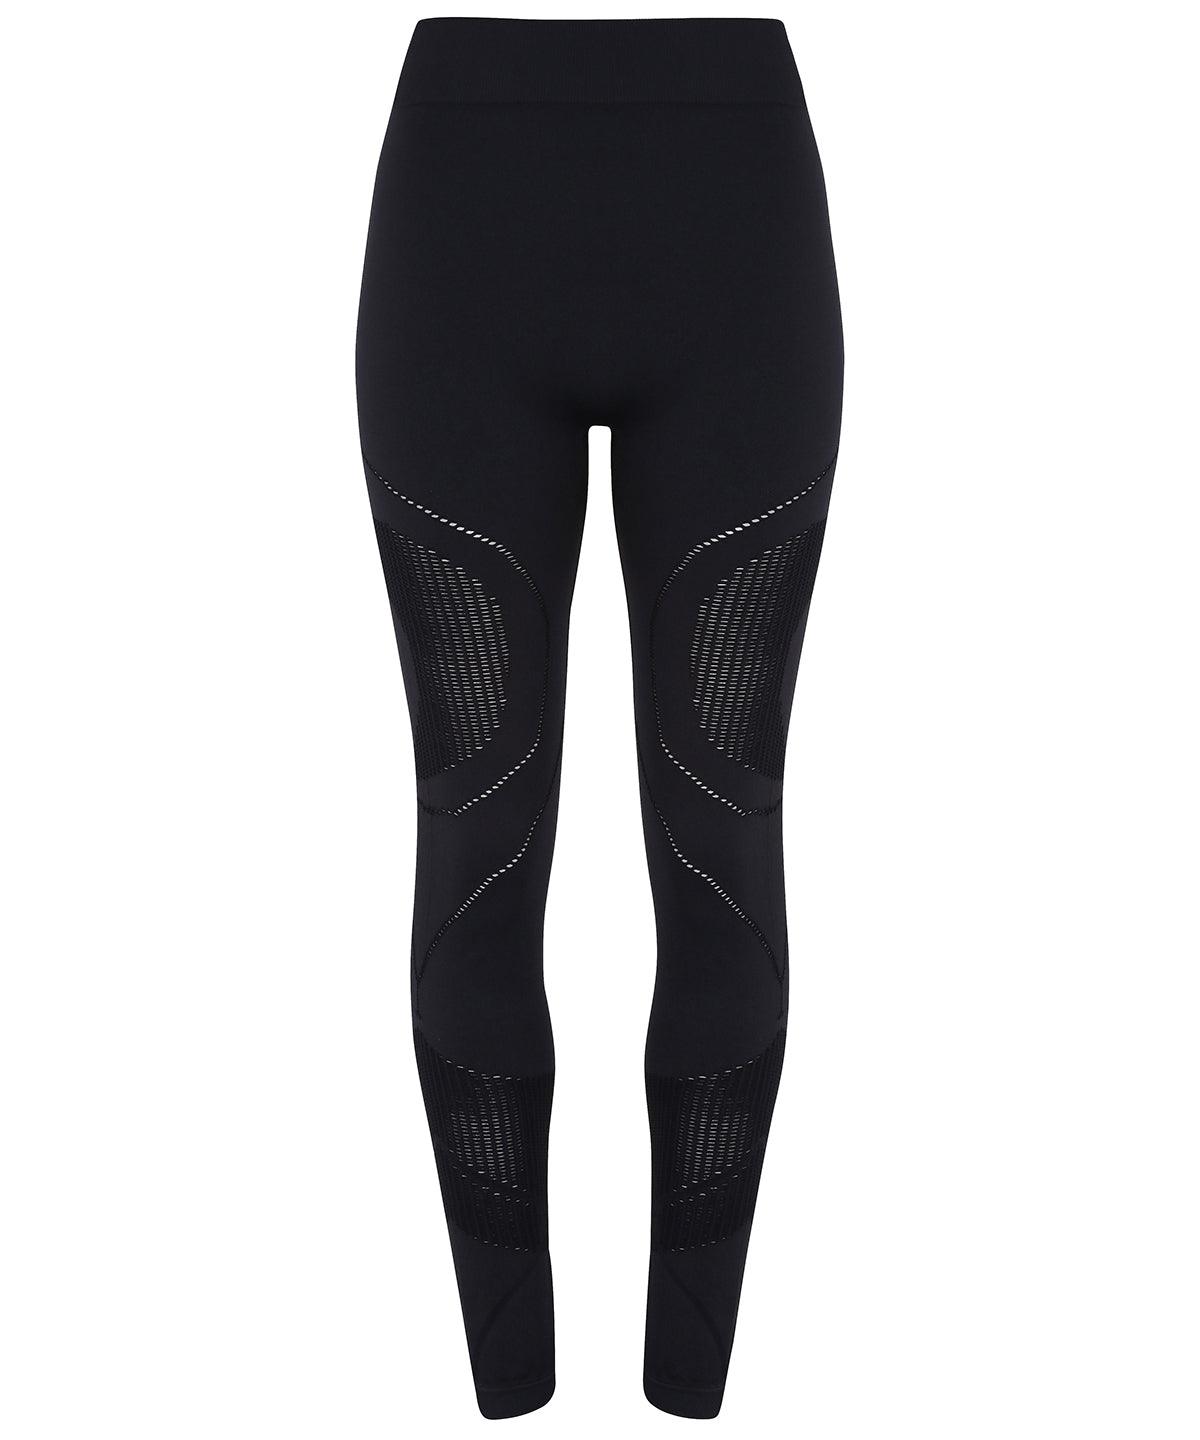 Black - Women's TriDri® seamless '3D fit' multi-sport reveal leggings Leggings TriDri® Athleisurewear, Back to Fitness, Co-ords, Exclusives, Leggings, Must Haves, On-Trend Activewear, Rebrandable, Trousers & Shorts Schoolwear Centres